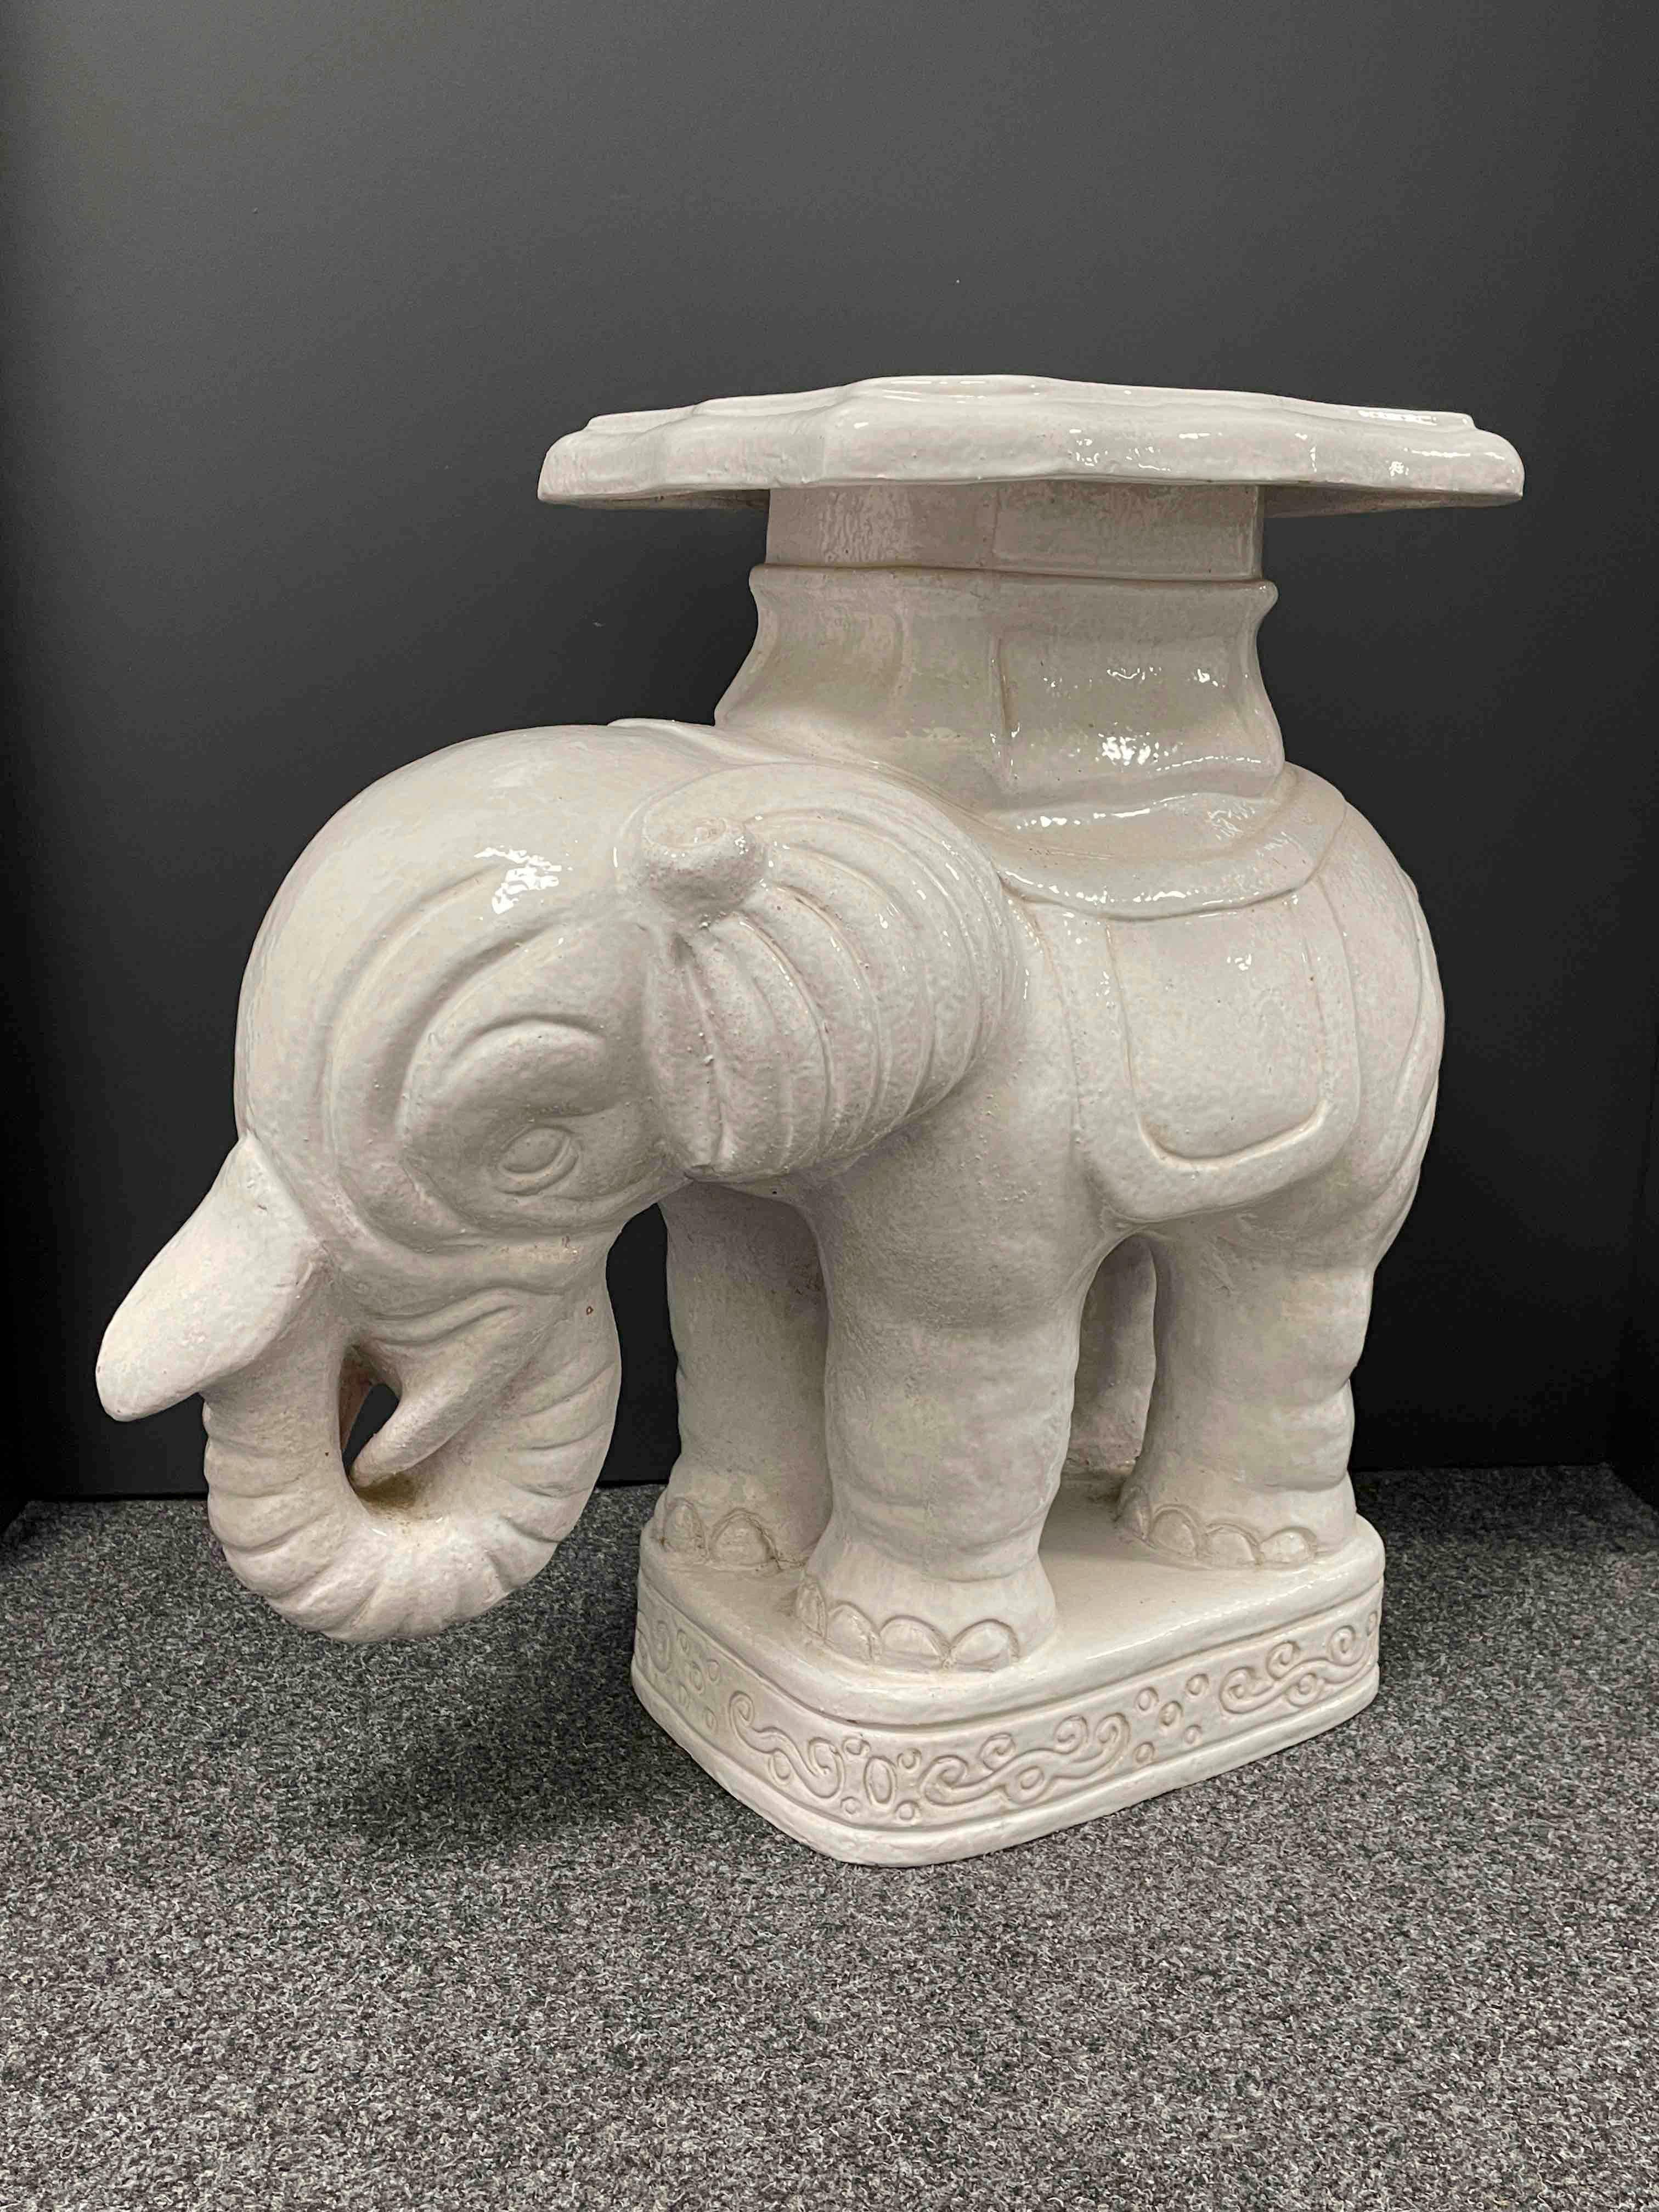 A pair of mid 20th century glazed ceramic elephant garden stool, flower pot seat or side tables. Handmade of ceramic / earthenware / majolica. Nice addition to your home, patio or garden. A nice addition to any room, patio, pool area or yard.
  